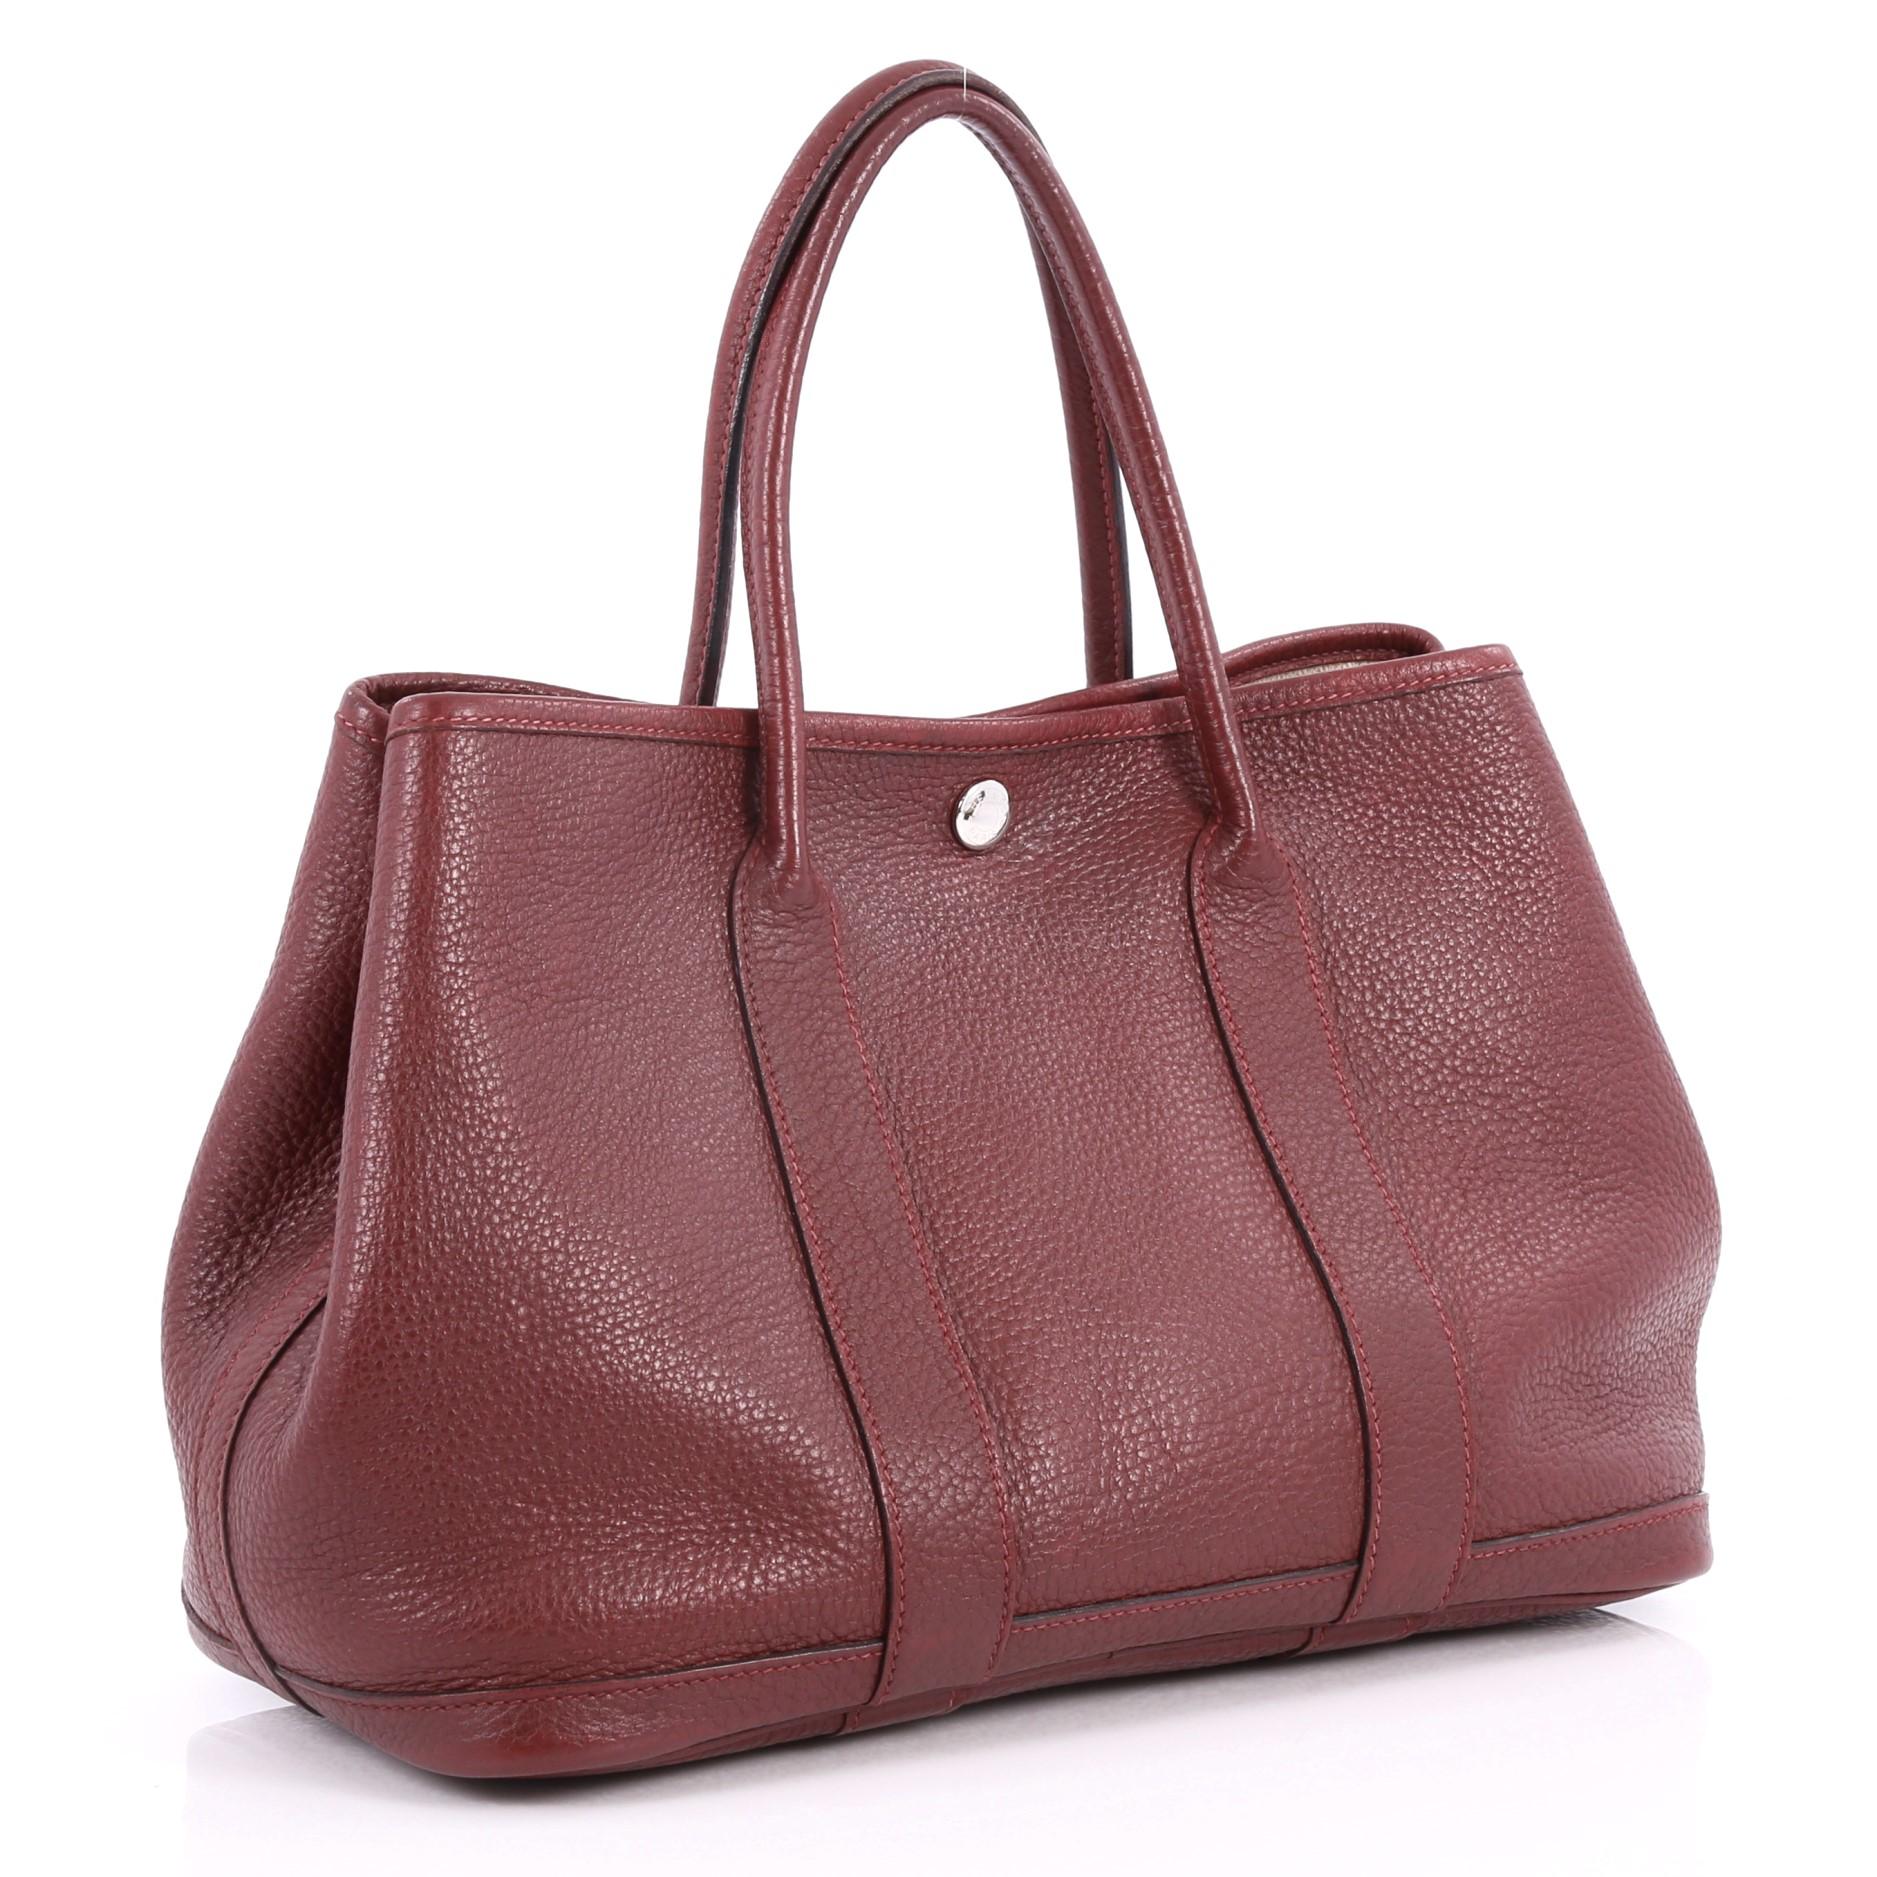 Brown Hermes Garden Party Tote Leather 30